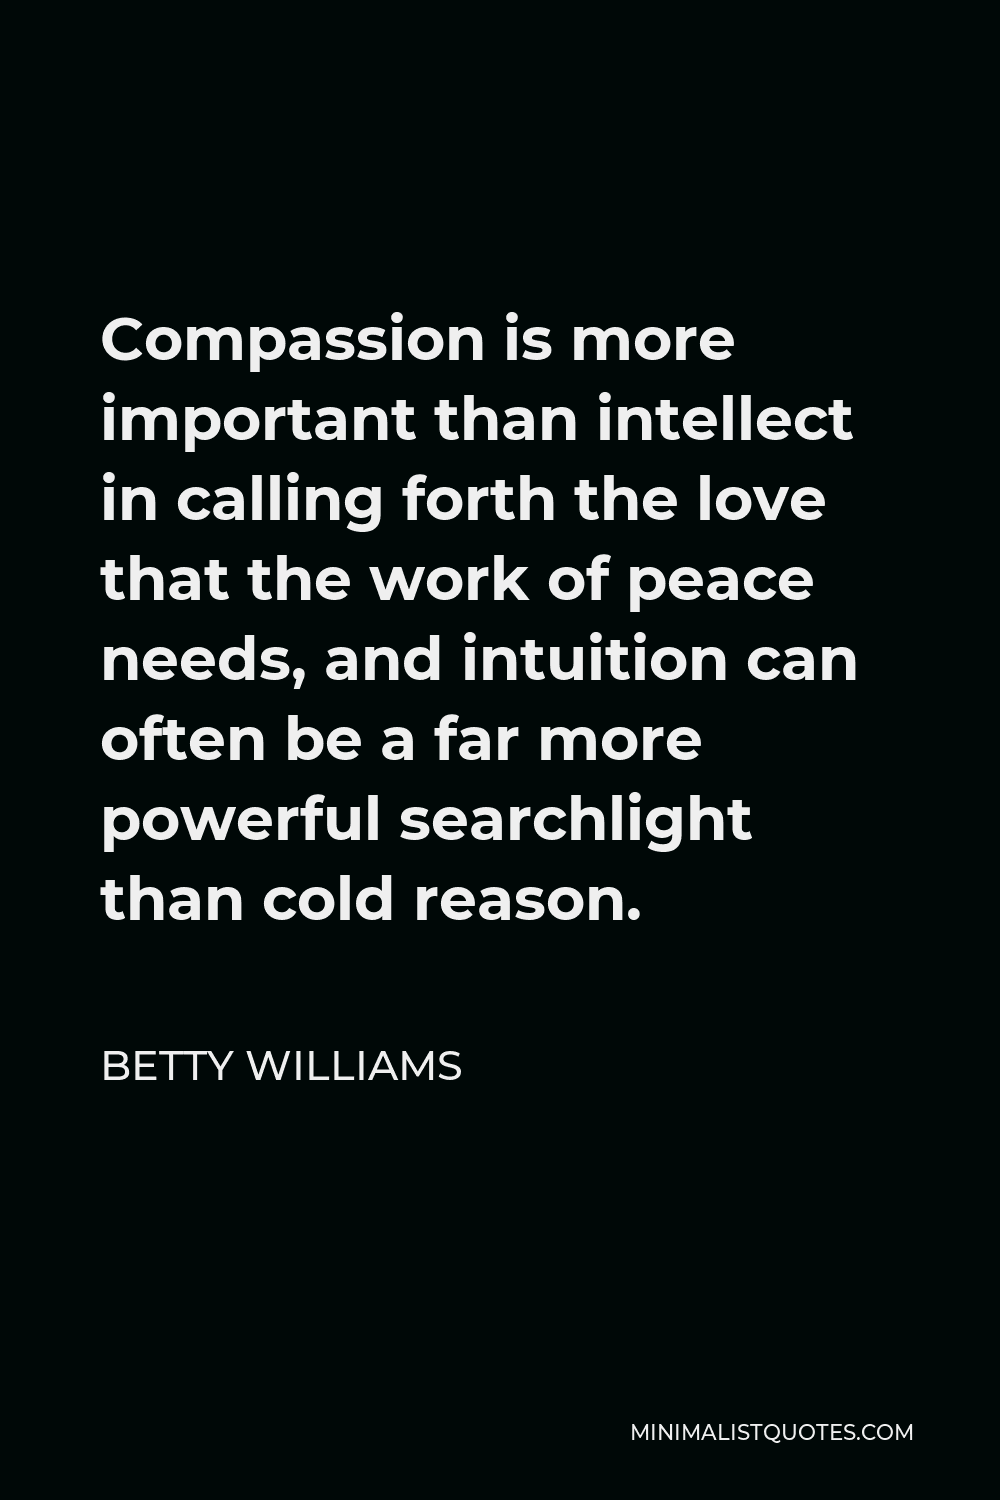 Betty Williams Quote - Compassion is more important than intellect in calling forth the love that the work of peace needs, and intuition can often be a far more powerful searchlight than cold reason.